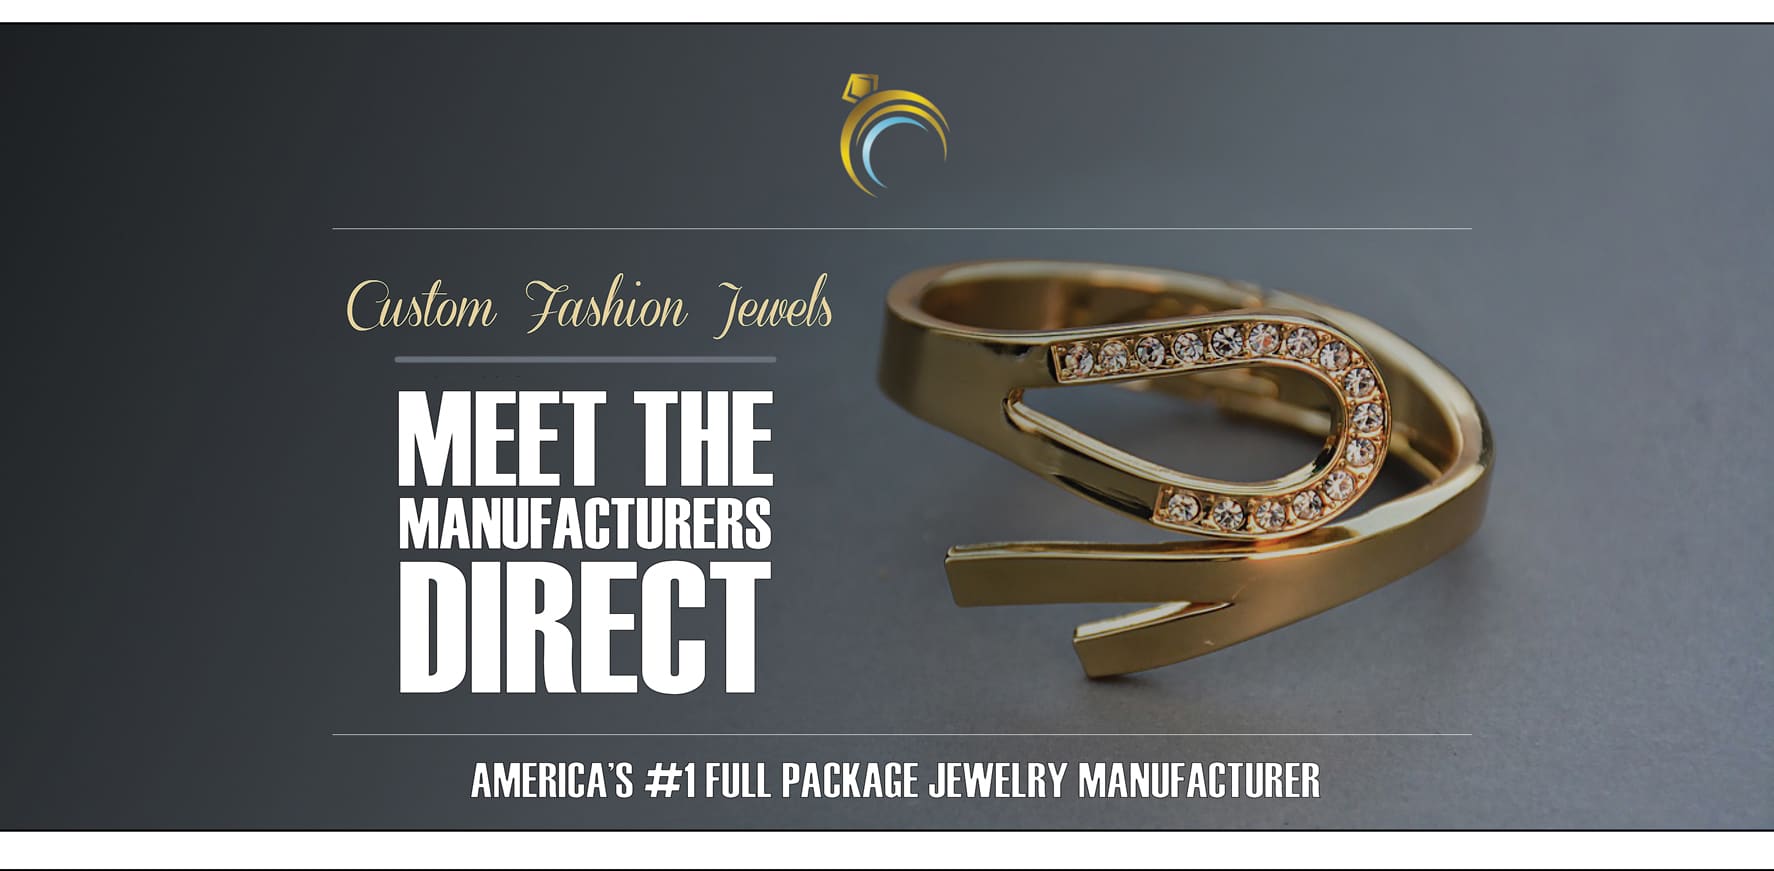 USA wholesale jewelry manufacturing for bulk jewelry and accessories